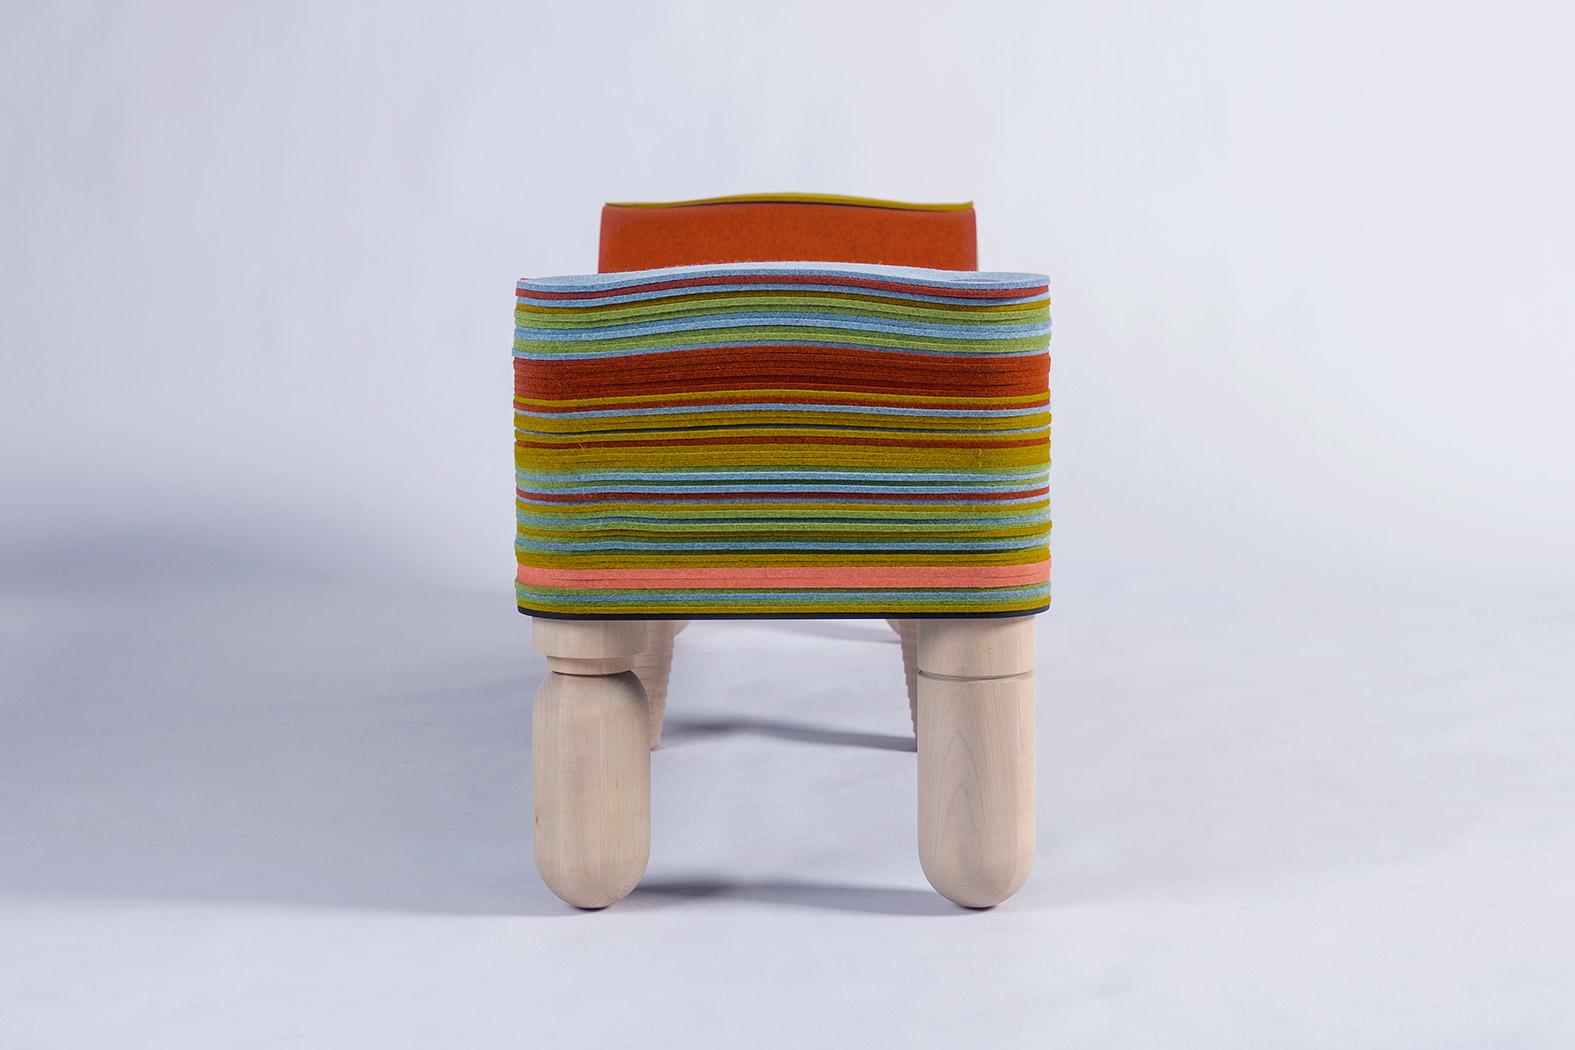 Maxine B, Felt and Wood Bench, Benoist F. Drut in STACKABL, Canada, 2021 For Sale 2